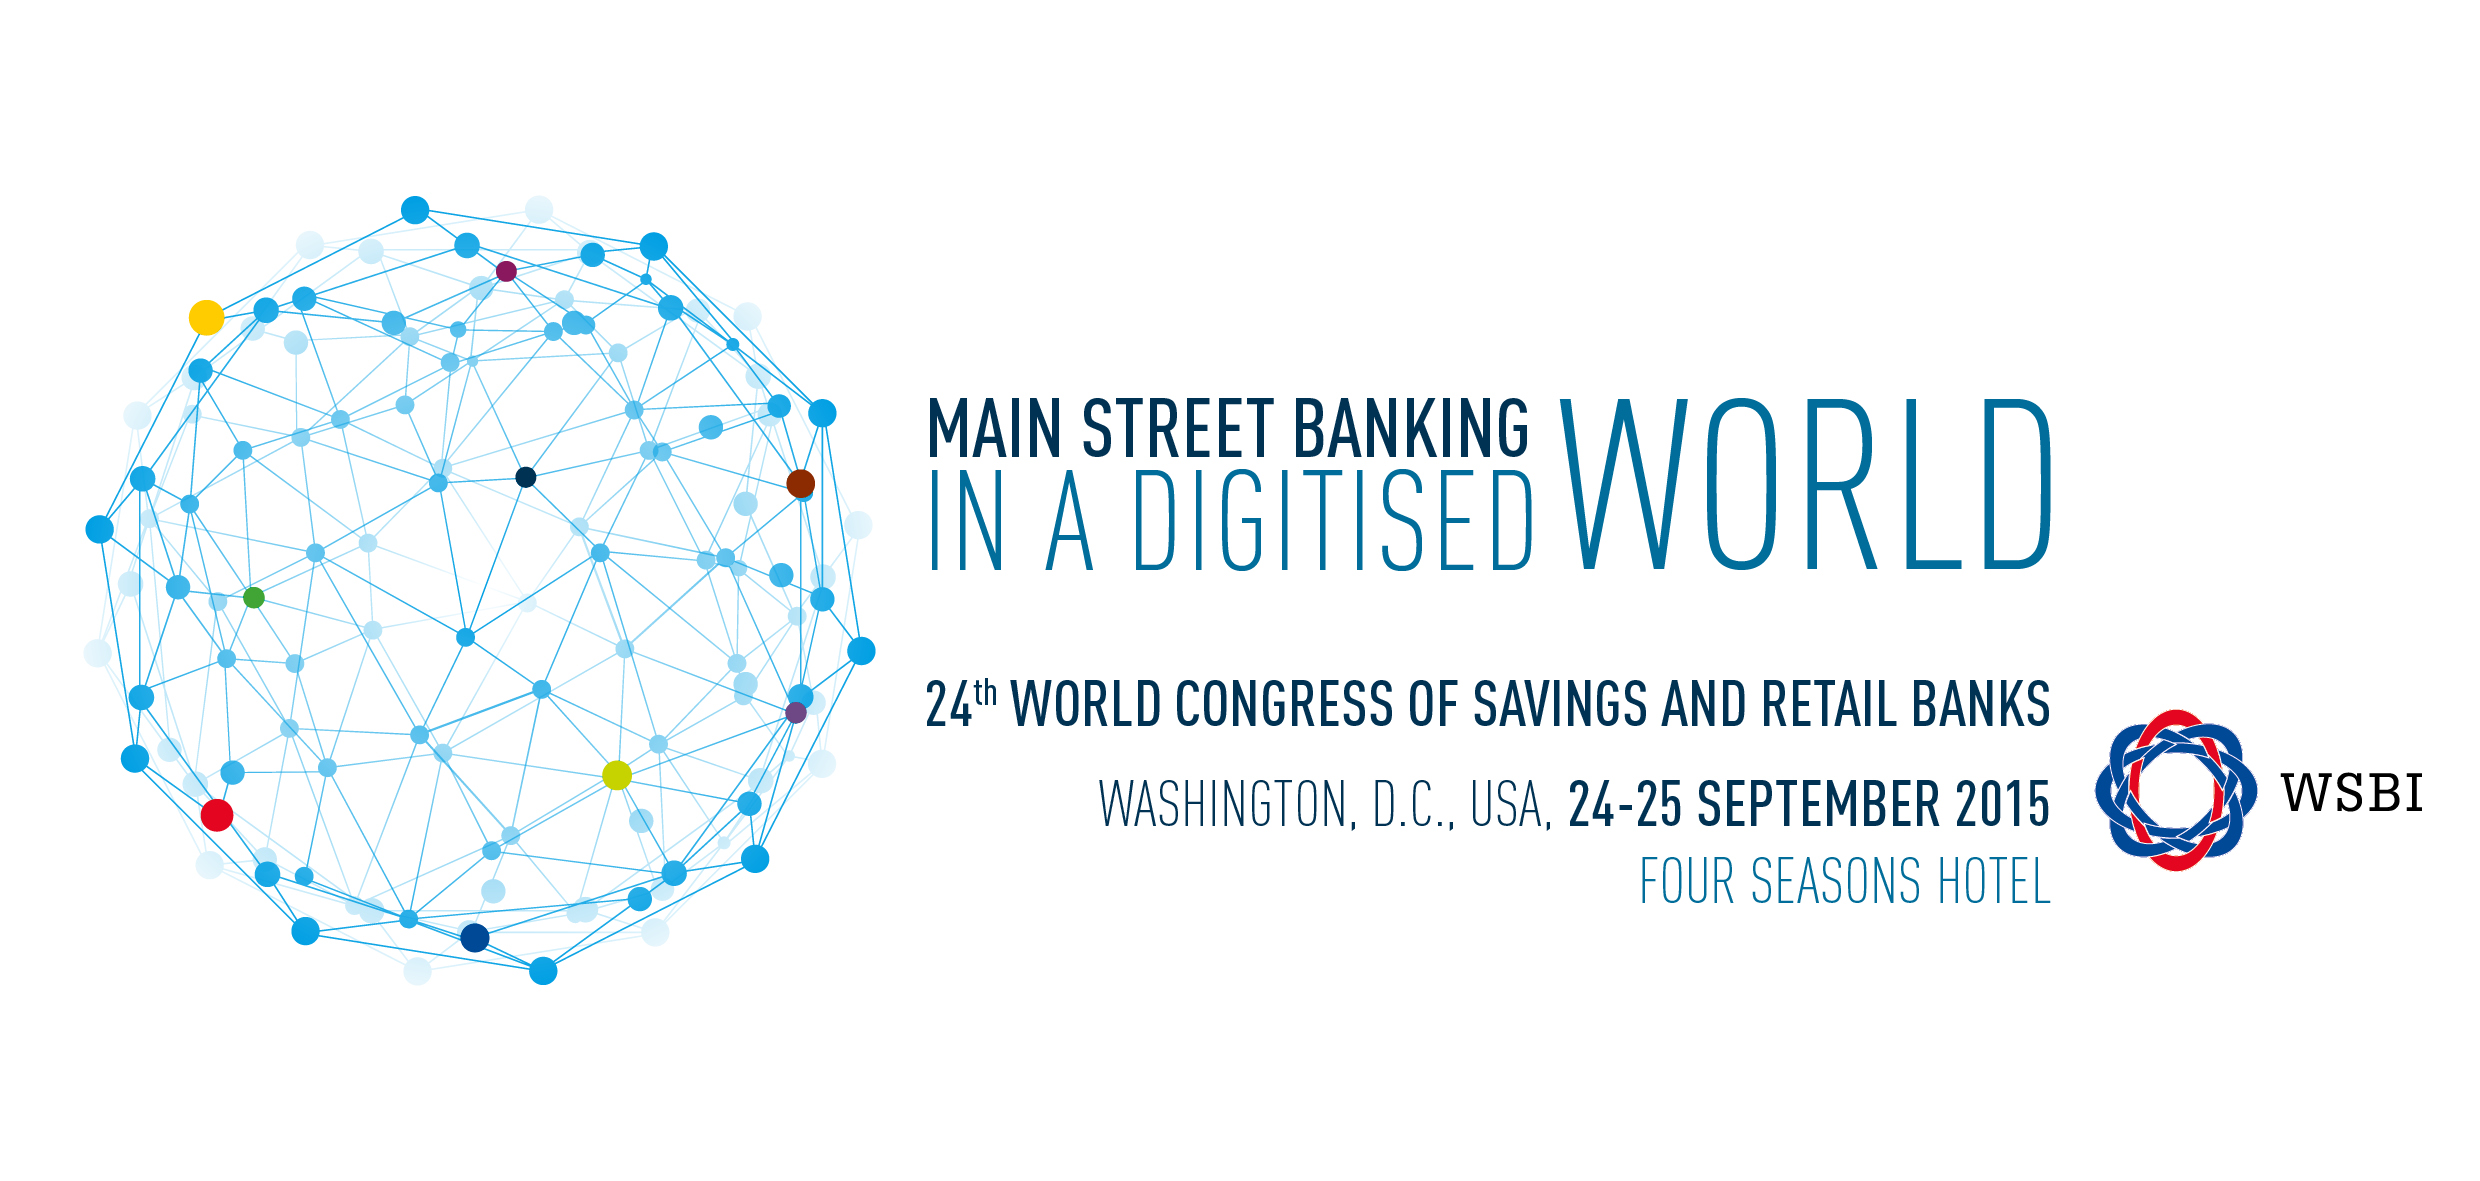 24th World Congress of Savings and Retail Banks